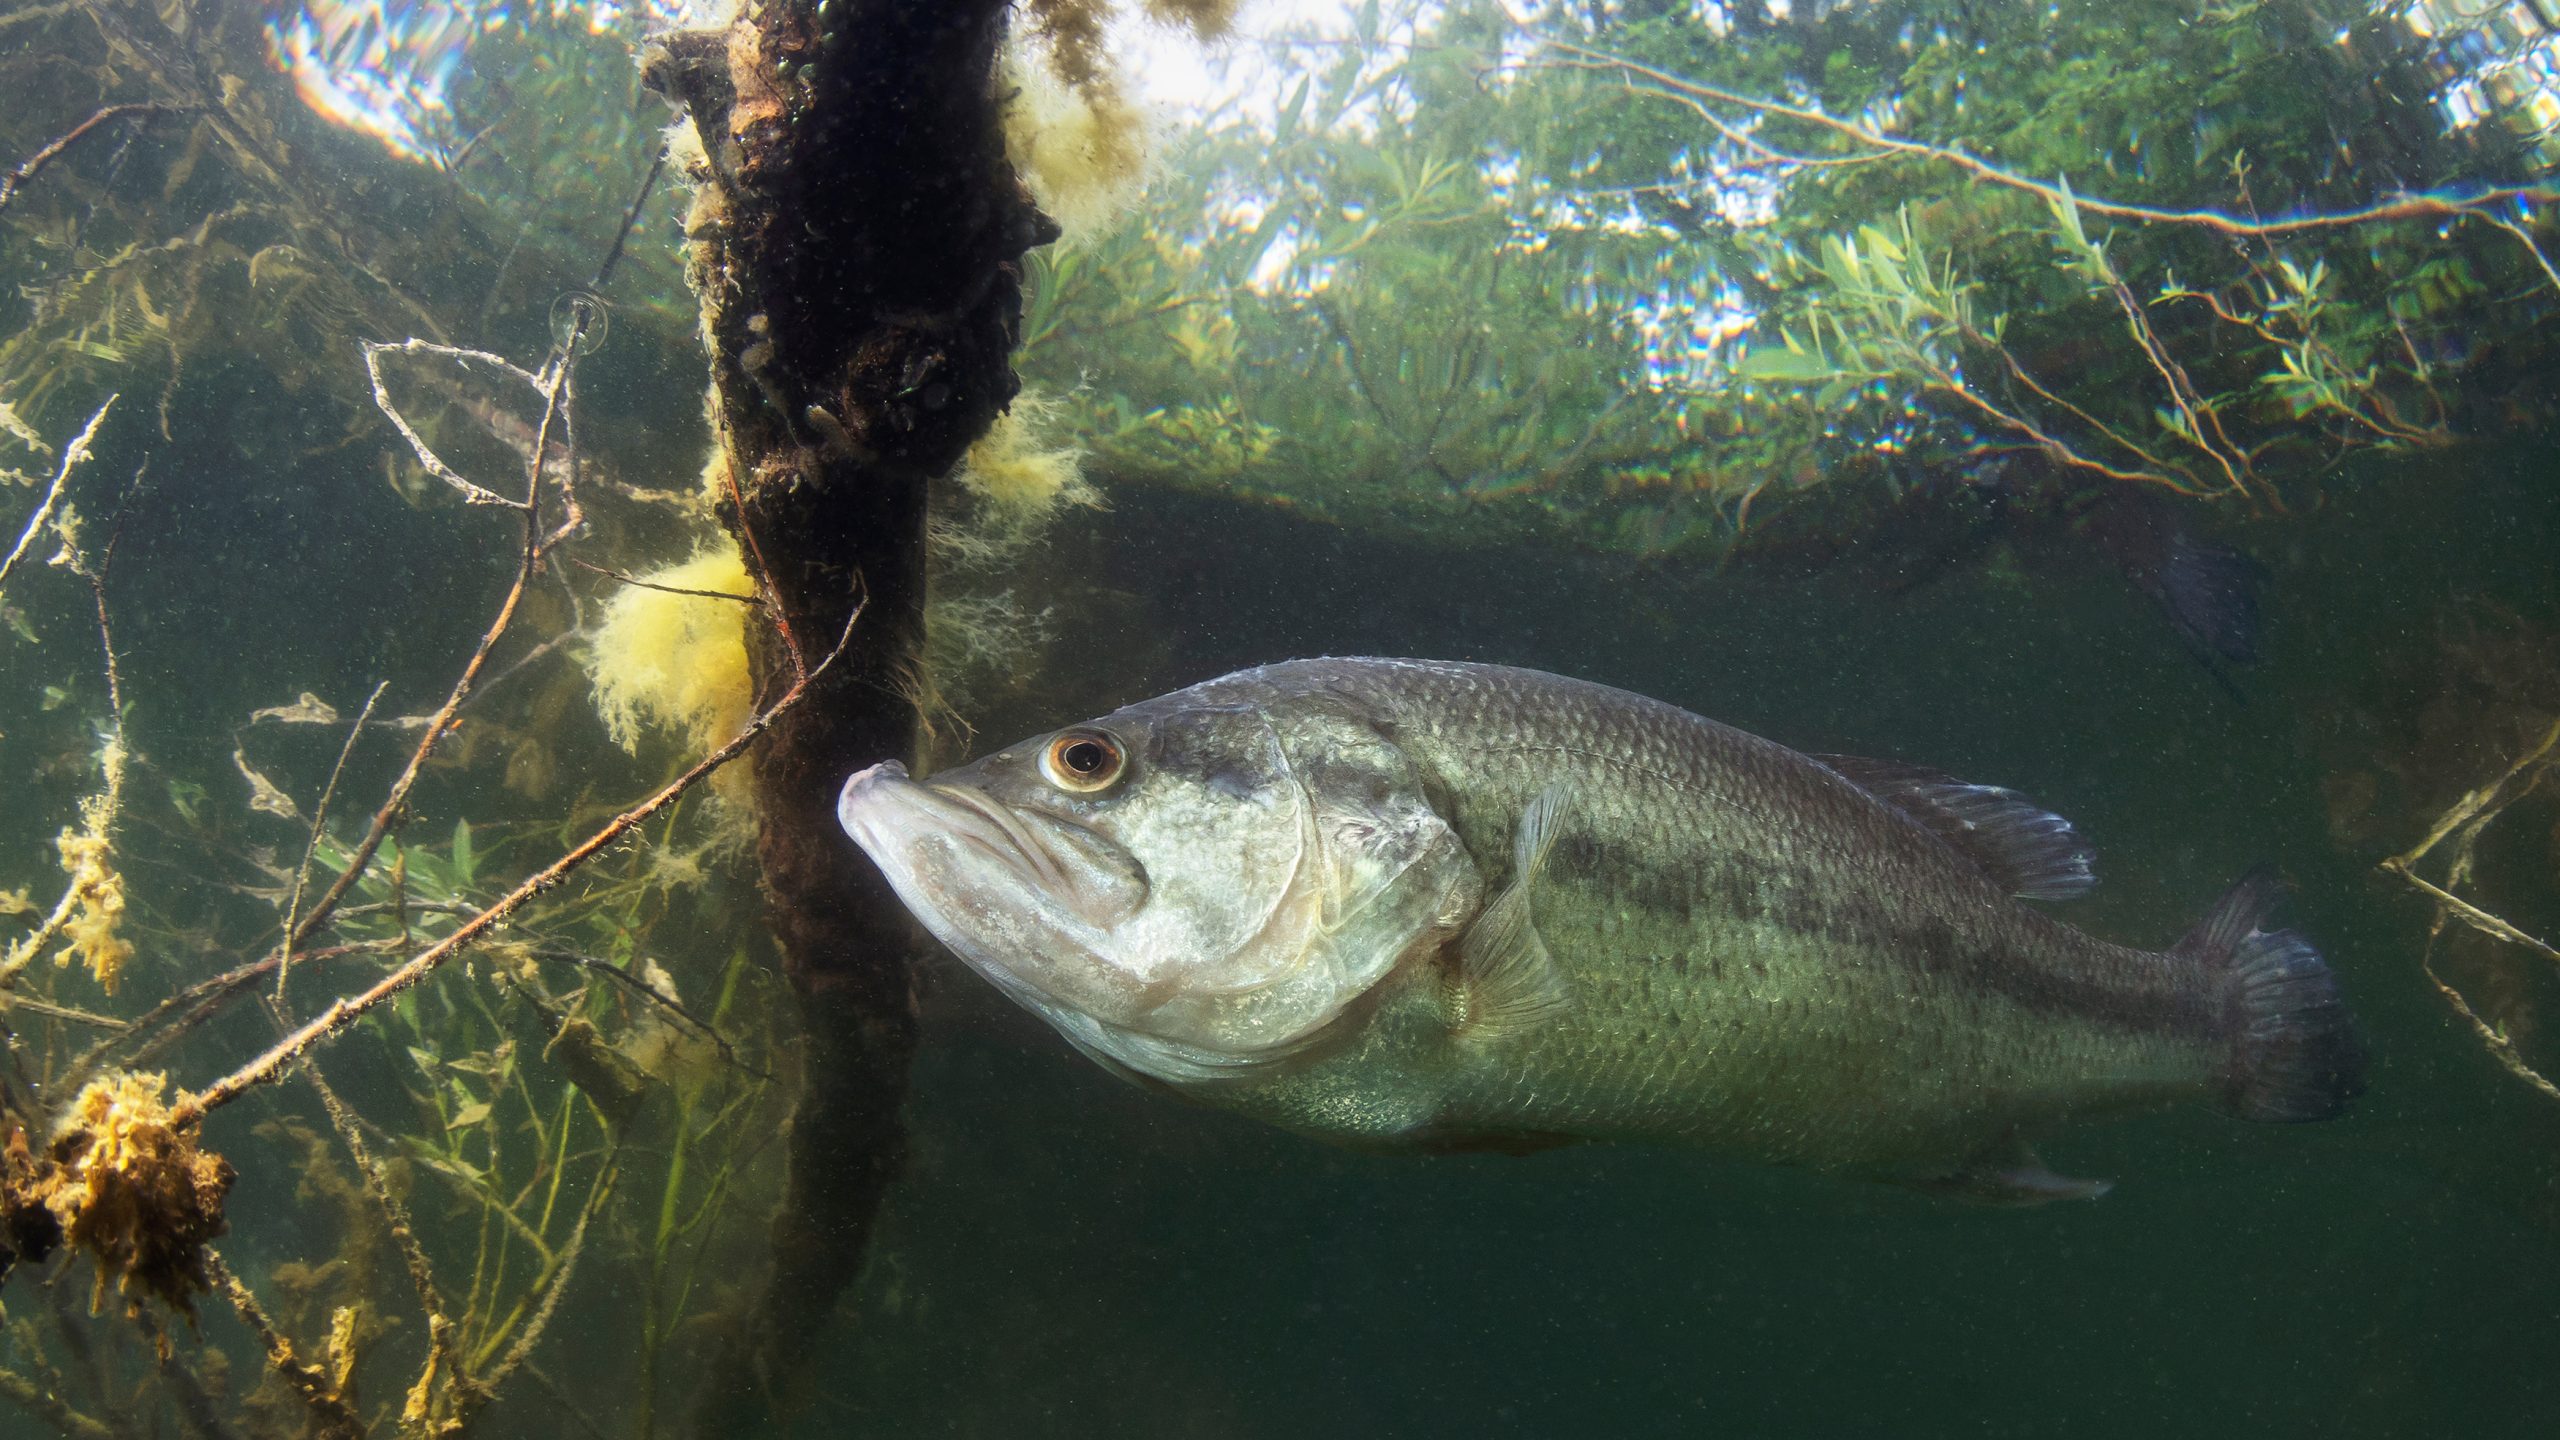 Underwater picture of a frash water fish Largemouth Bass (Micropterus salmoides) nature light. Live in the lake. Blackbass.